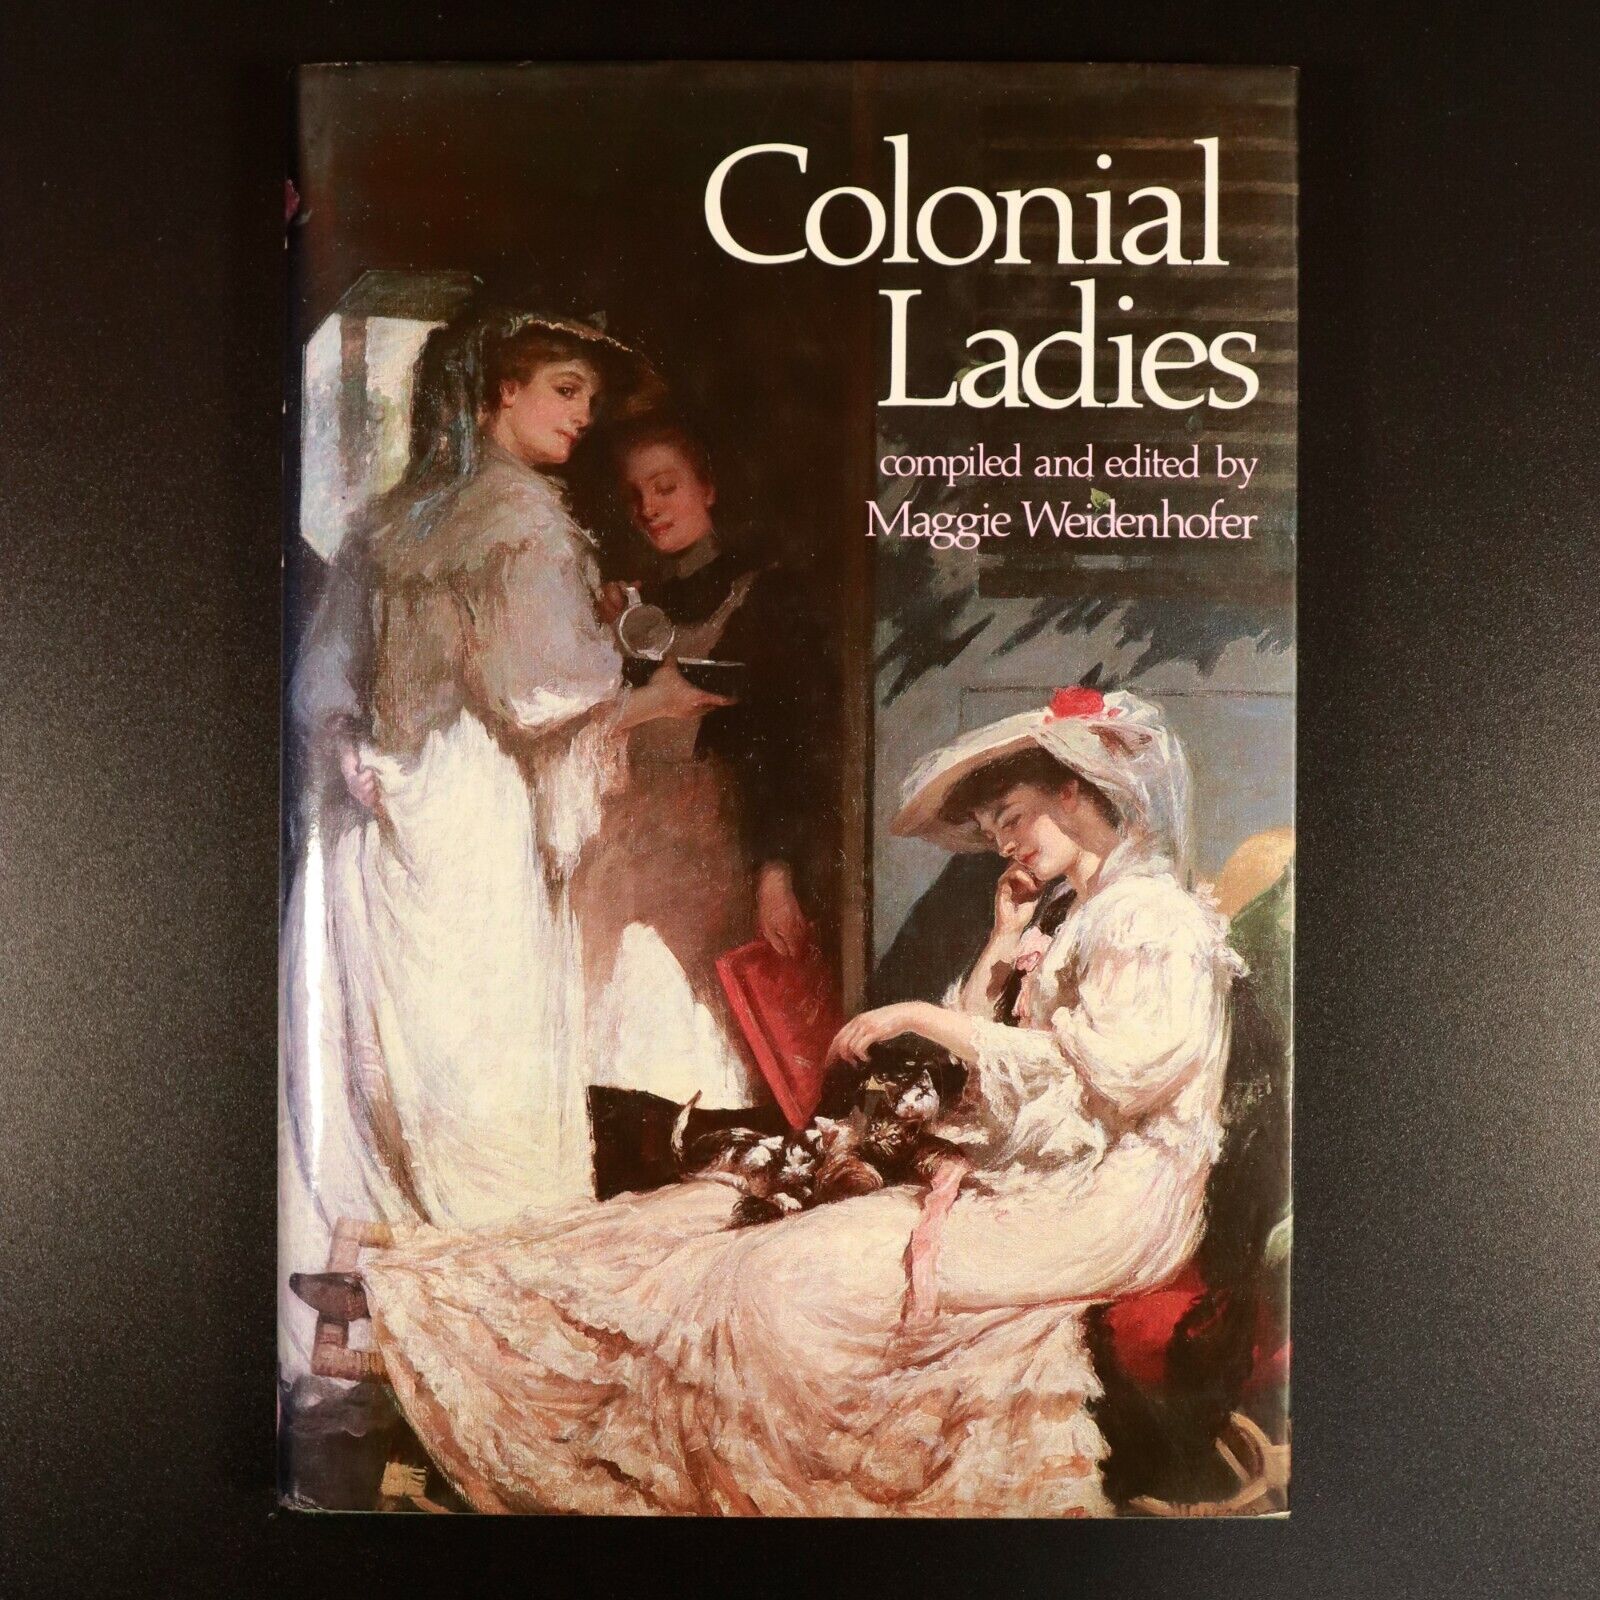 1985 Colonial Ladies by Maggie Weidenhofer Australian Colonial History Book